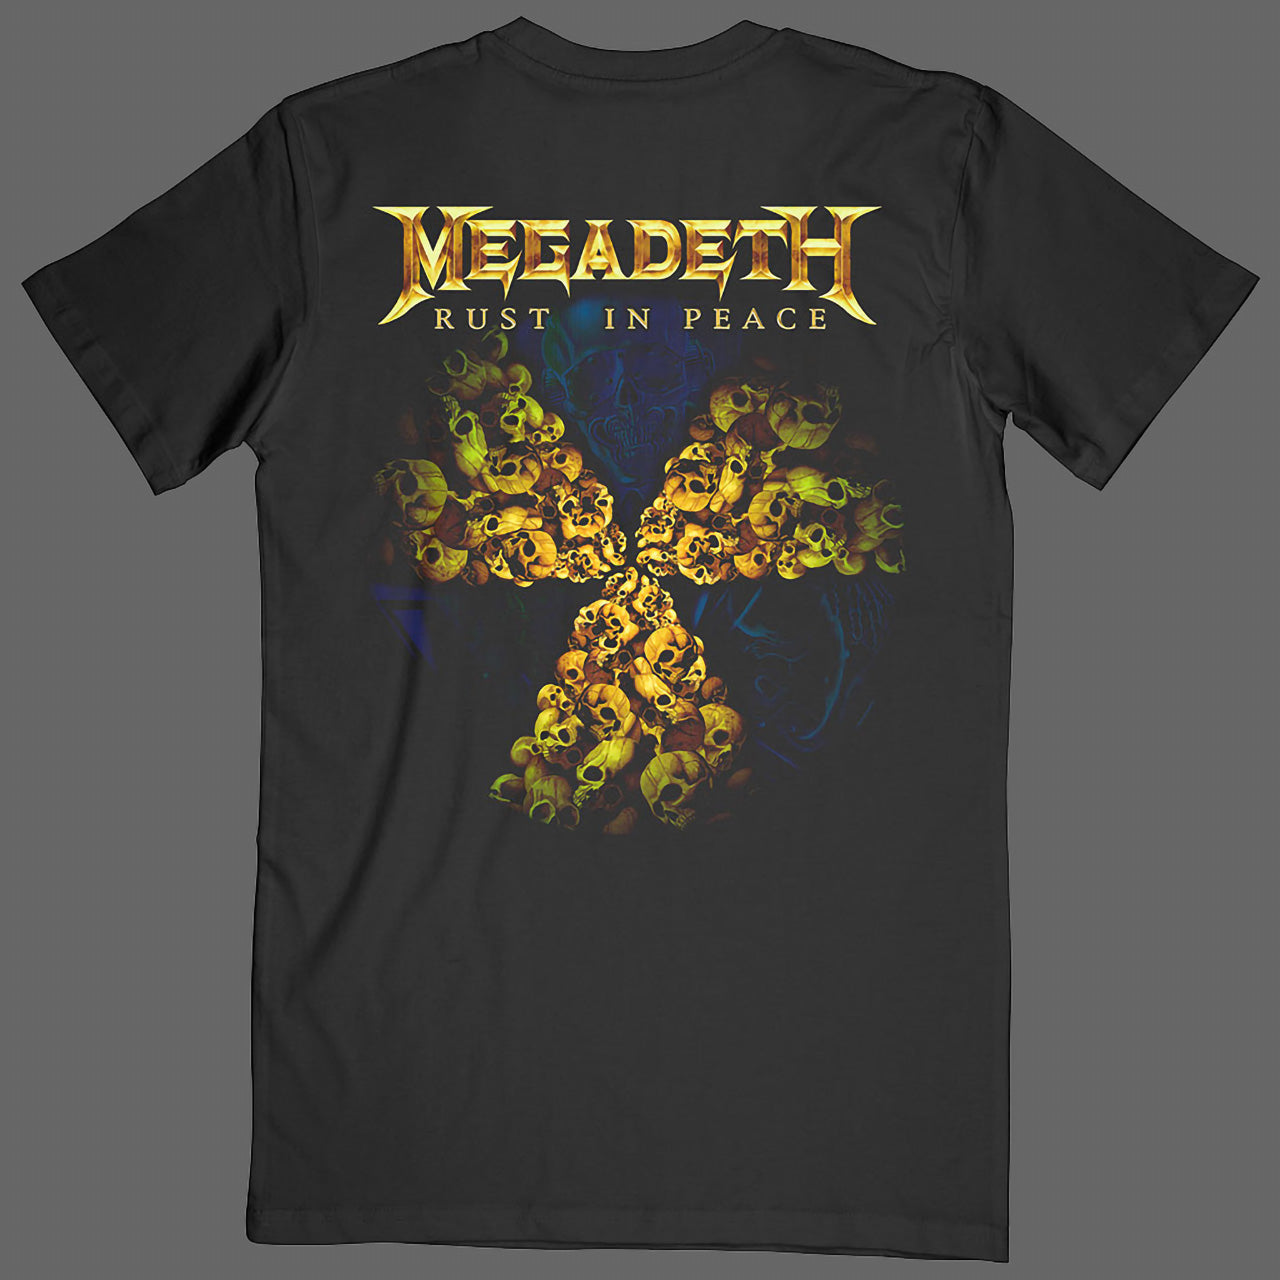 Megadeth - Rust in Peace (30th Anniversary) (T-Shirt)